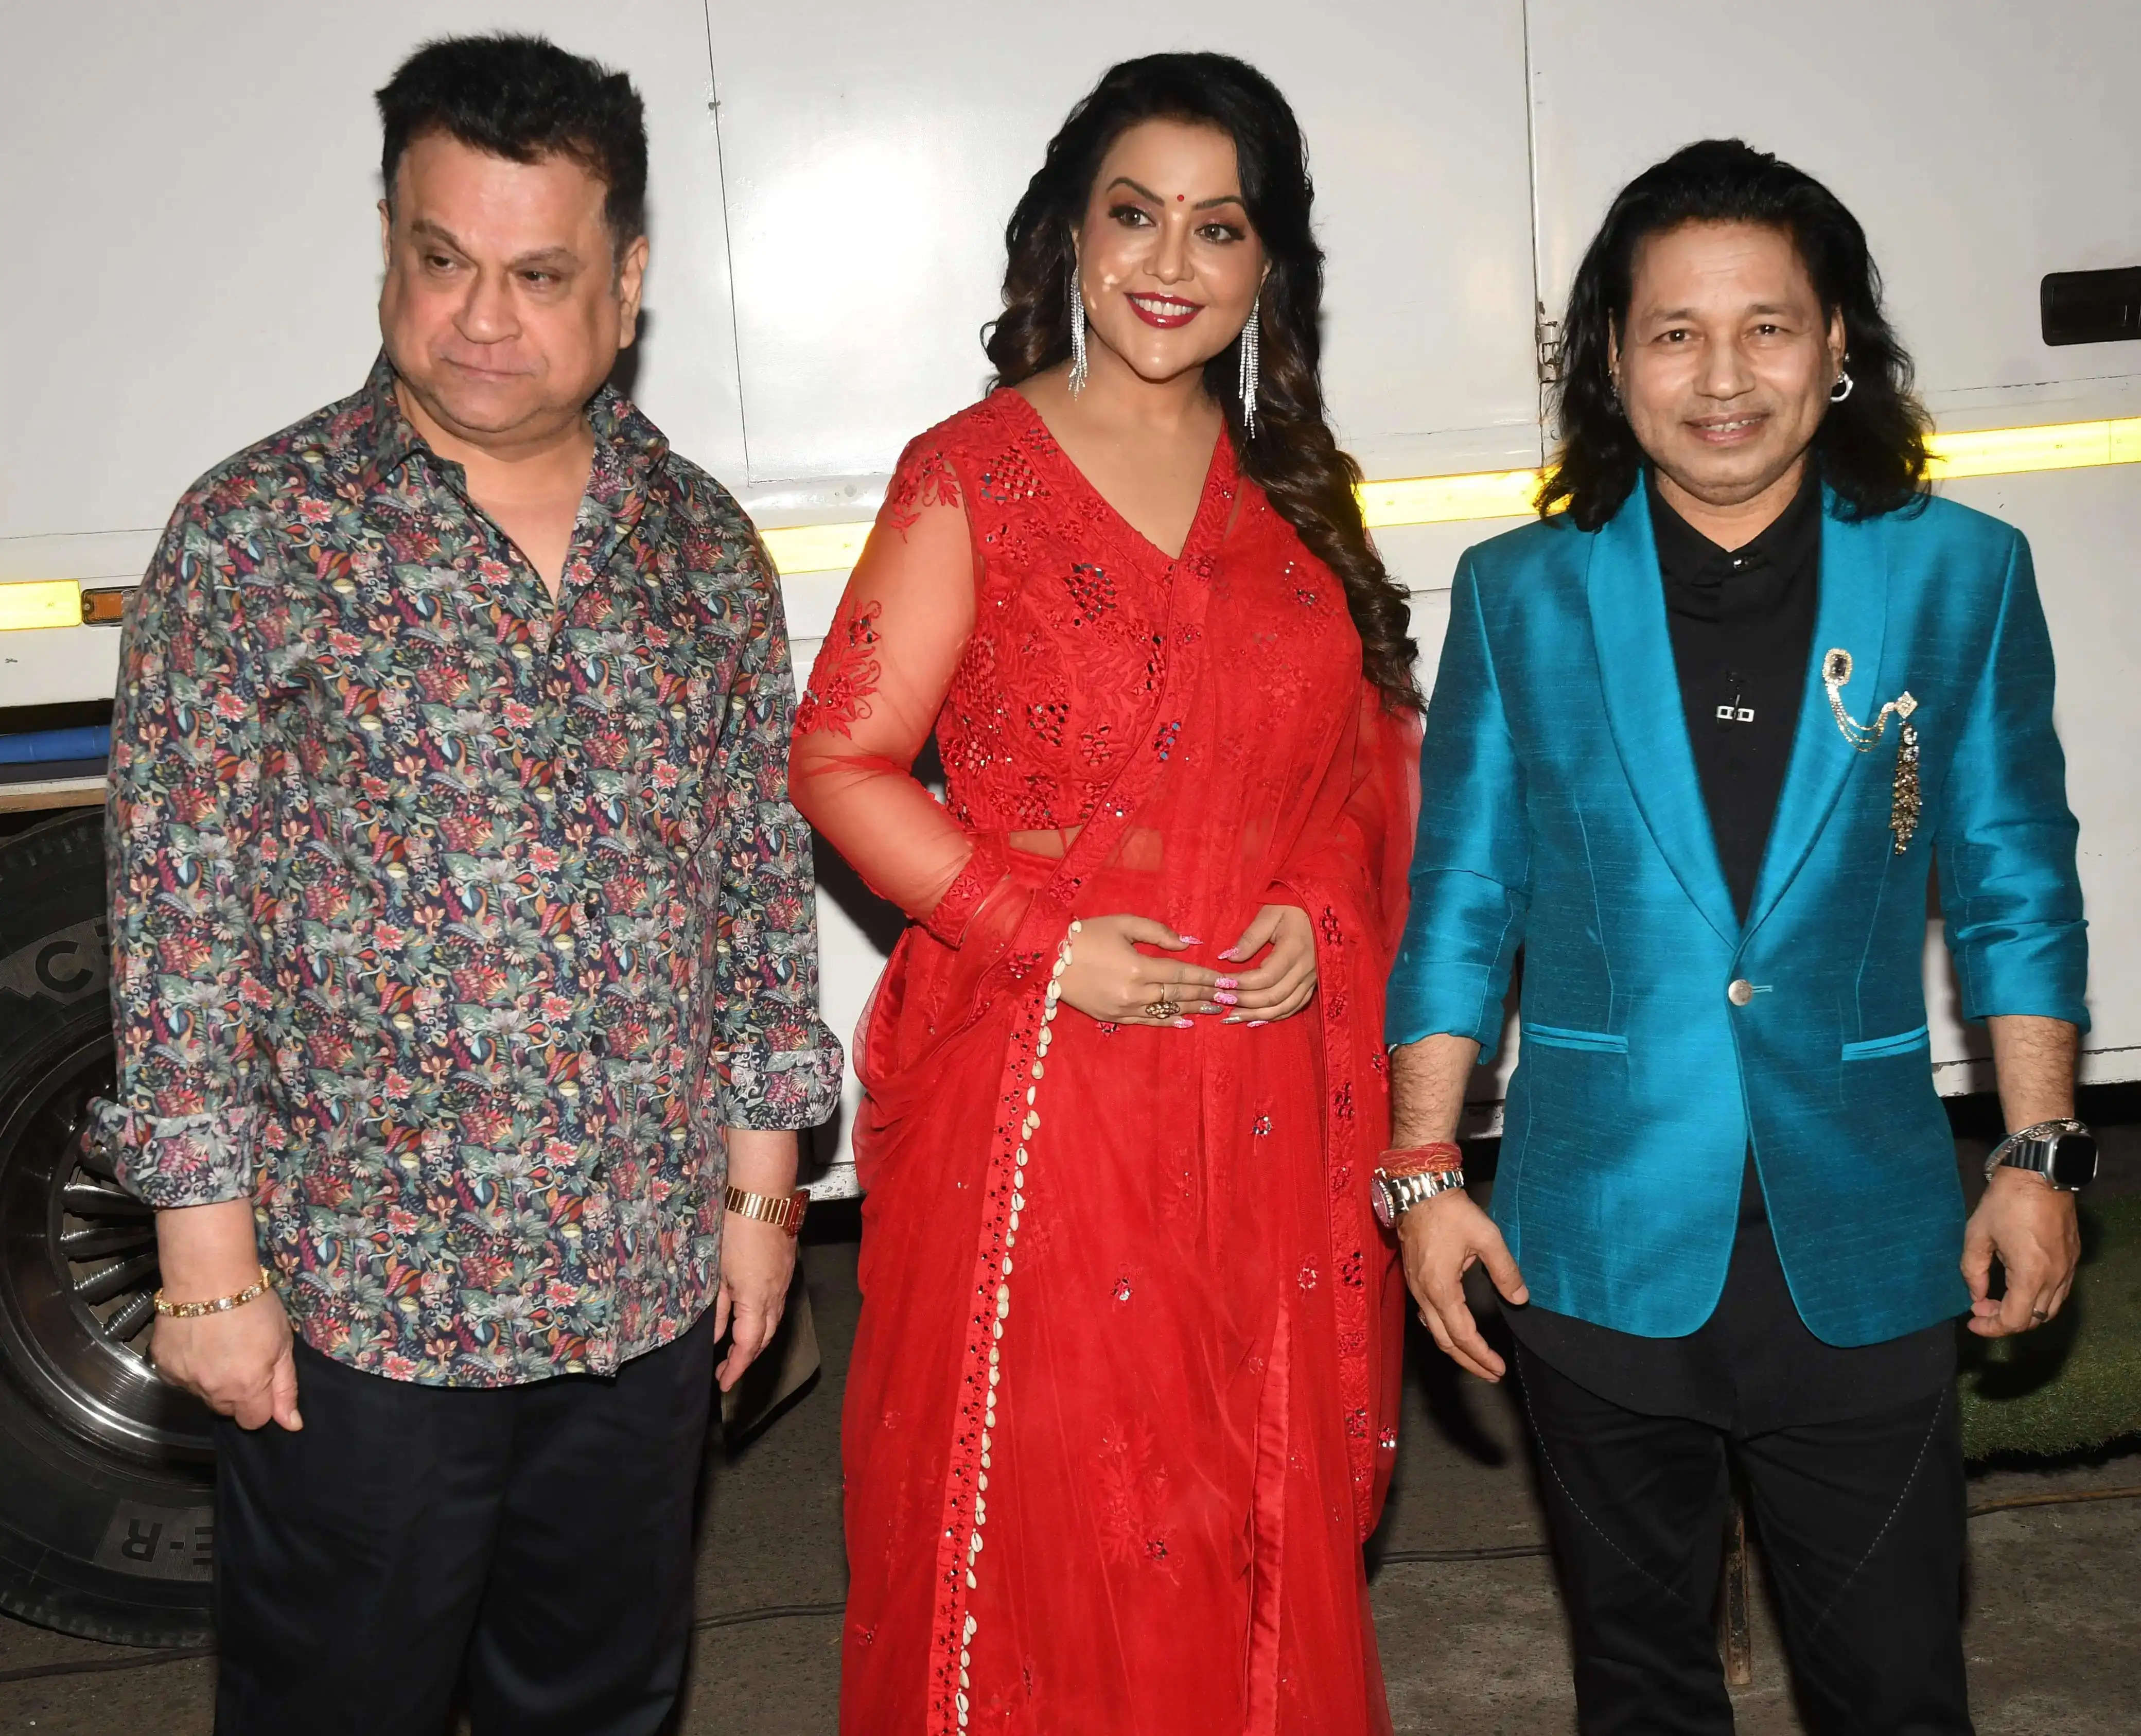 “Hey Ram" by Kailash Kher and Amruta Fadnavis Releases as a Tribute to the Pran Pratishtha Ceremony at Ayodhya's Ram Temple.